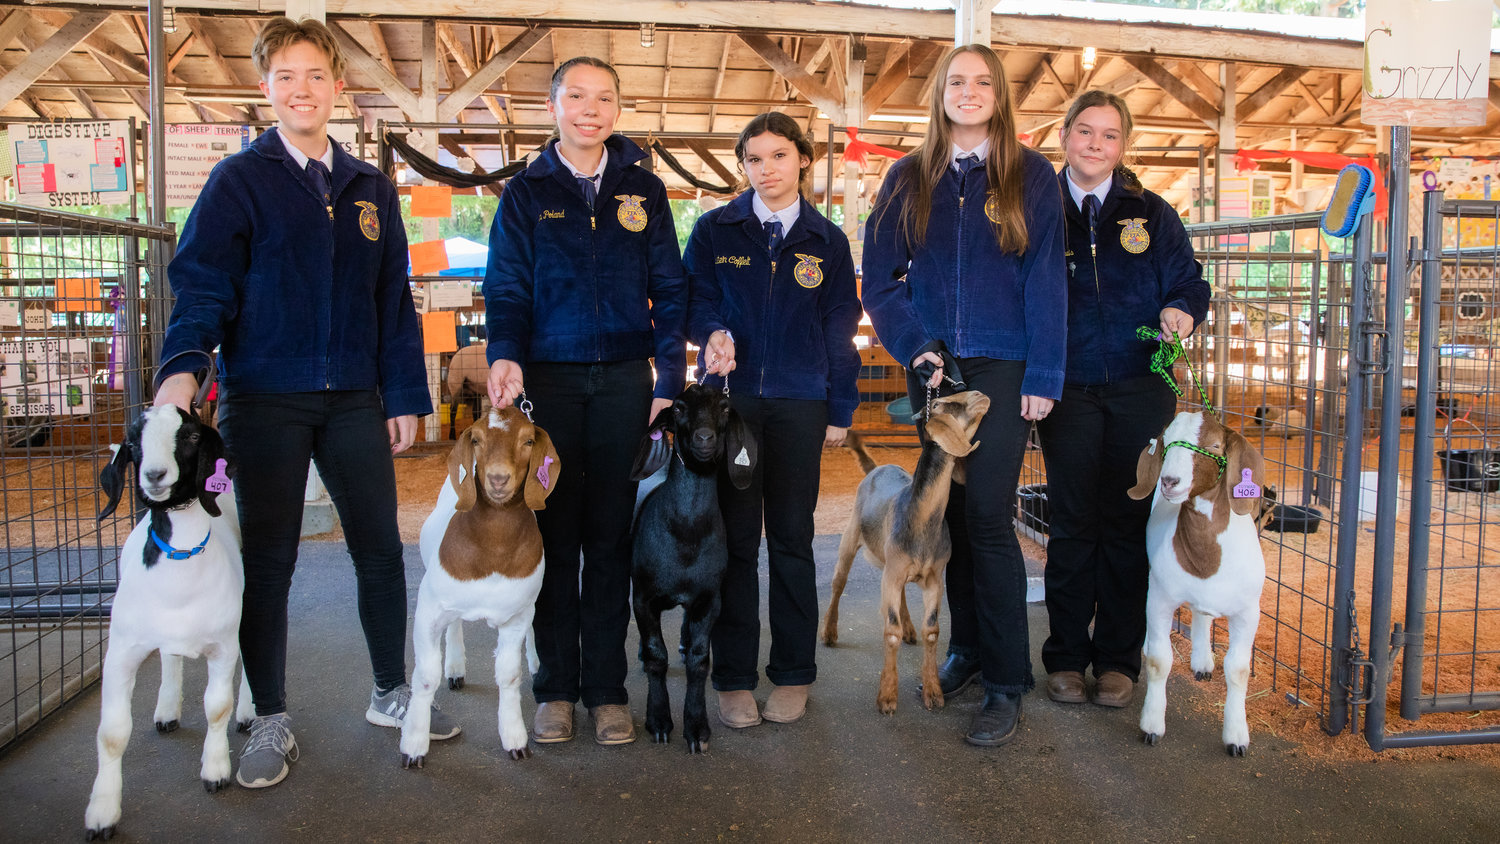 From left, Yelm FFA Members Fiona Fisher, Kyla Poland, Maile Poland, Aurora Cooper, Kai Ann Lewis and Anna Mills pose for a photo with goats Angus, Soos, Waddles, Grizzly and Rico at the Thurston County Fair on Thursday.